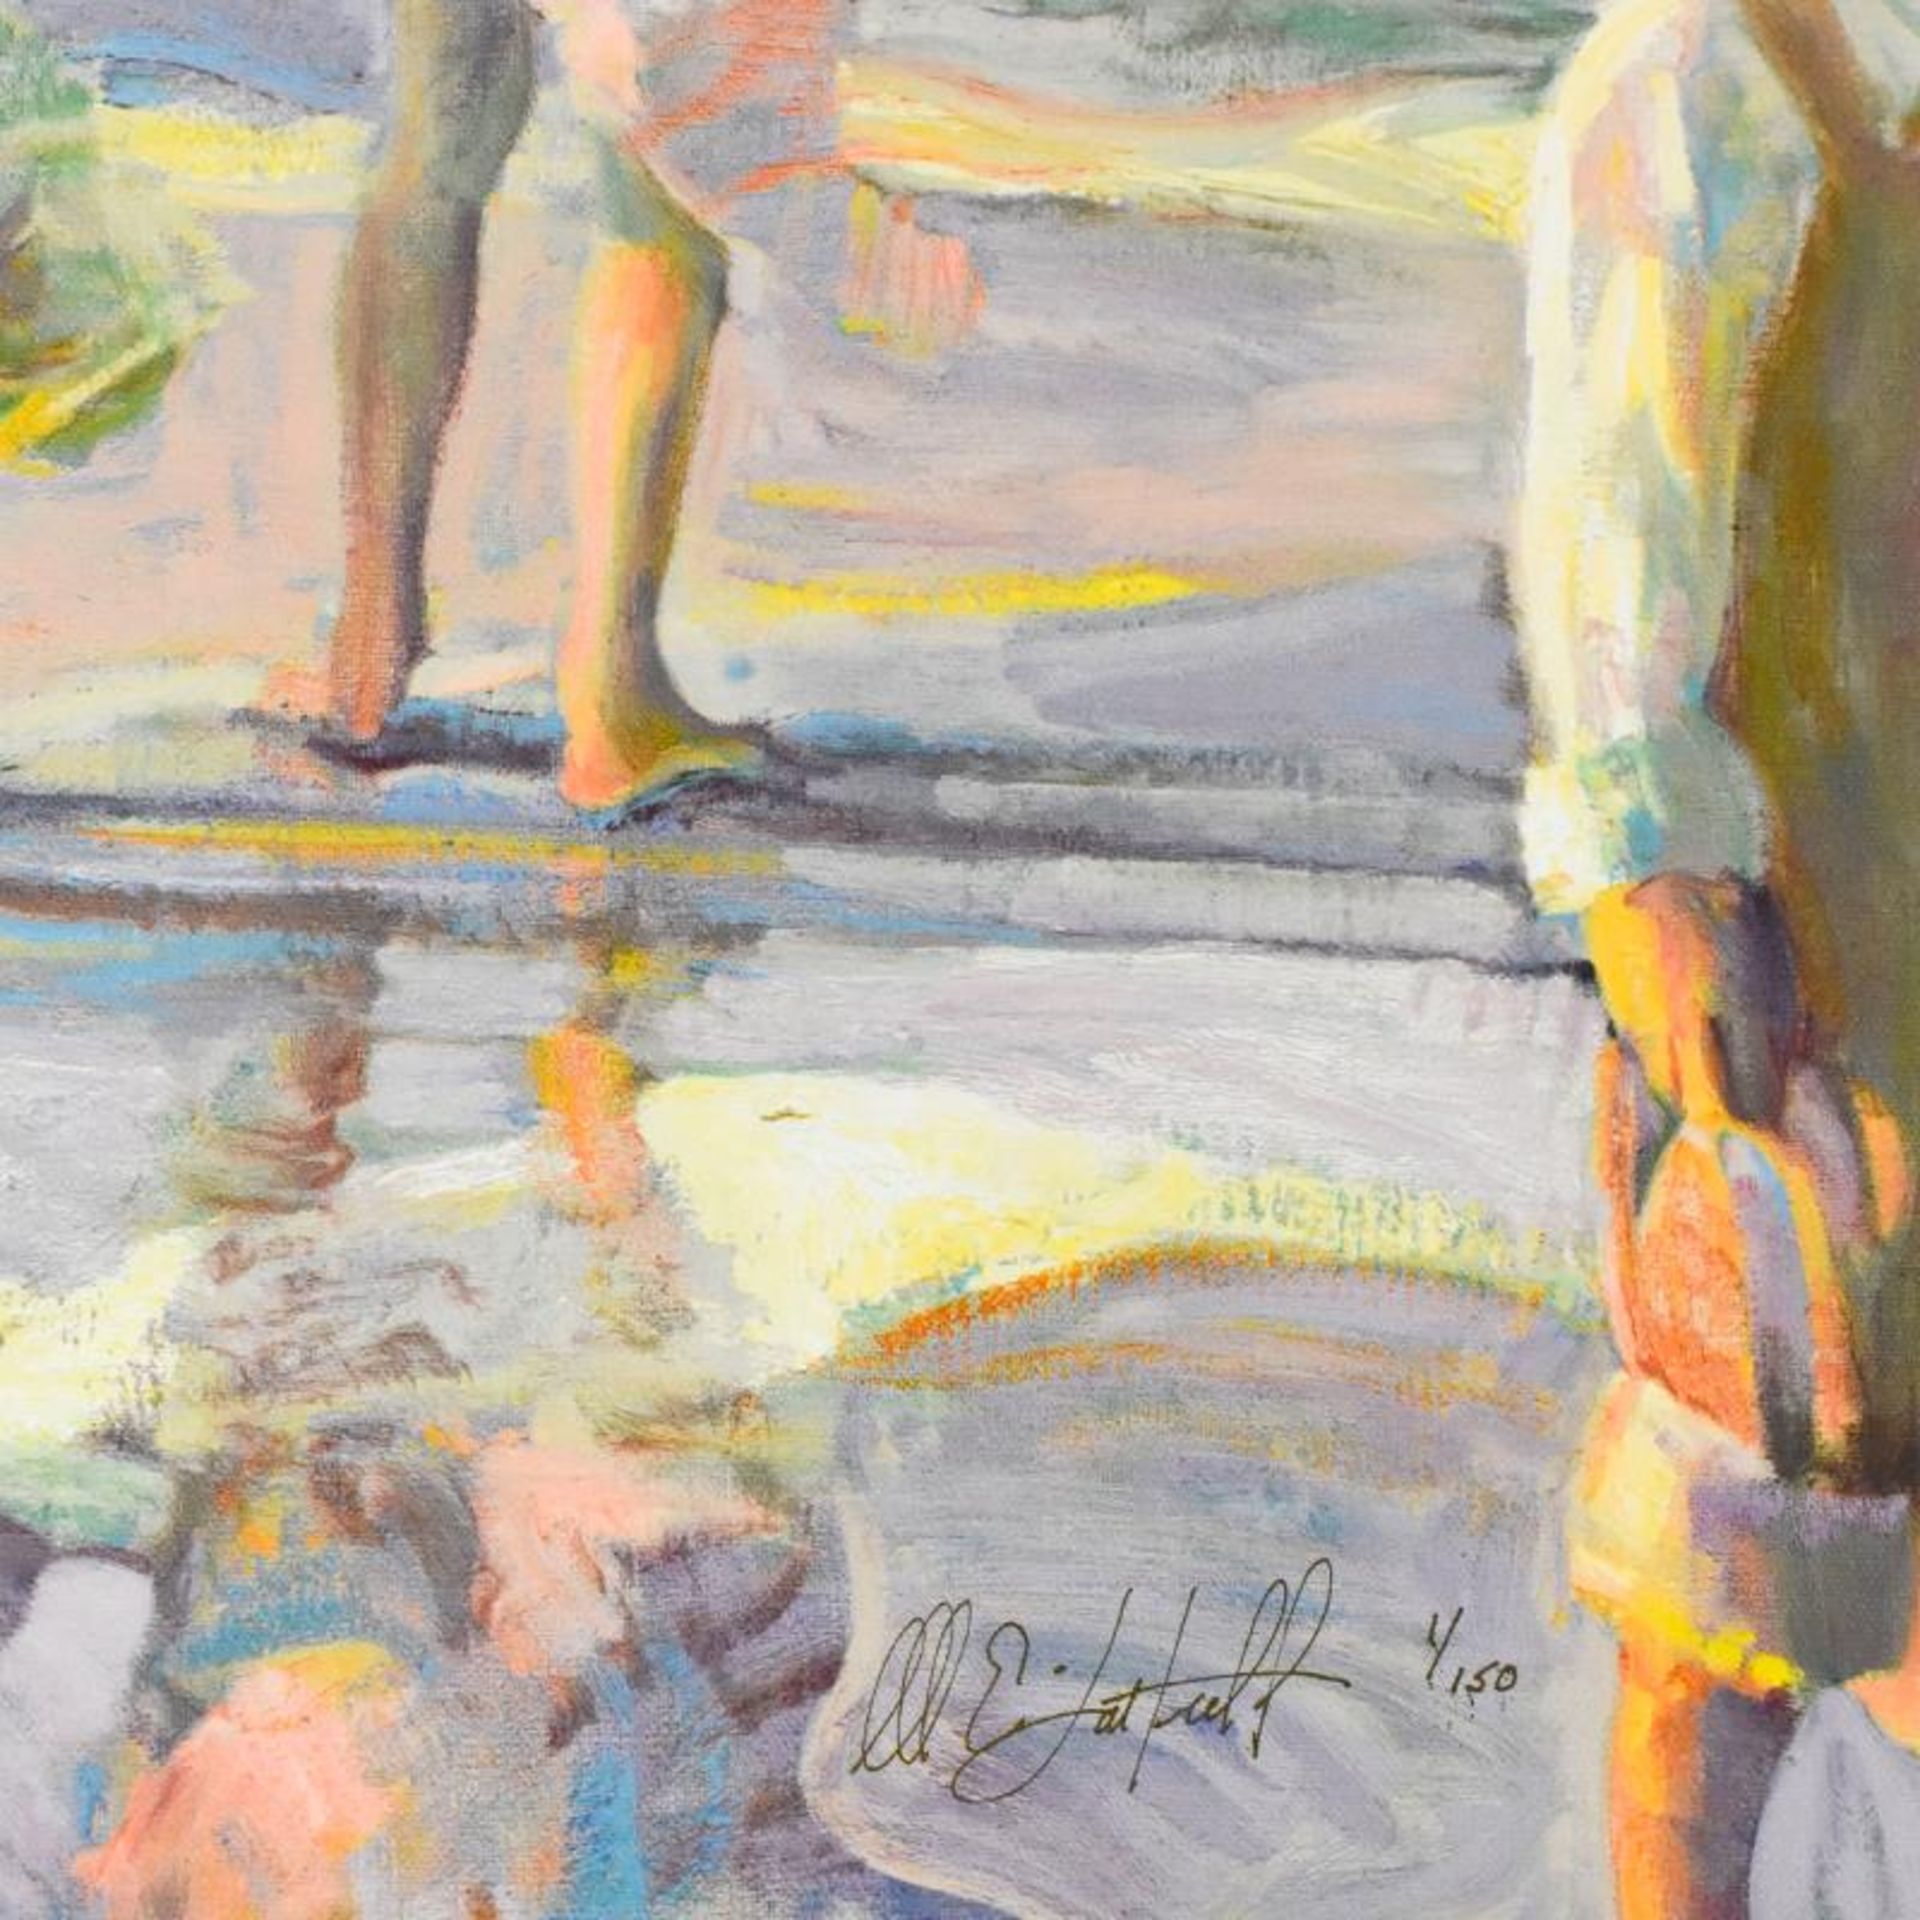 Don Hatfield, "Frolicking at the Seashore" Limited Edition Serigraph on Canvas, - Image 2 of 2